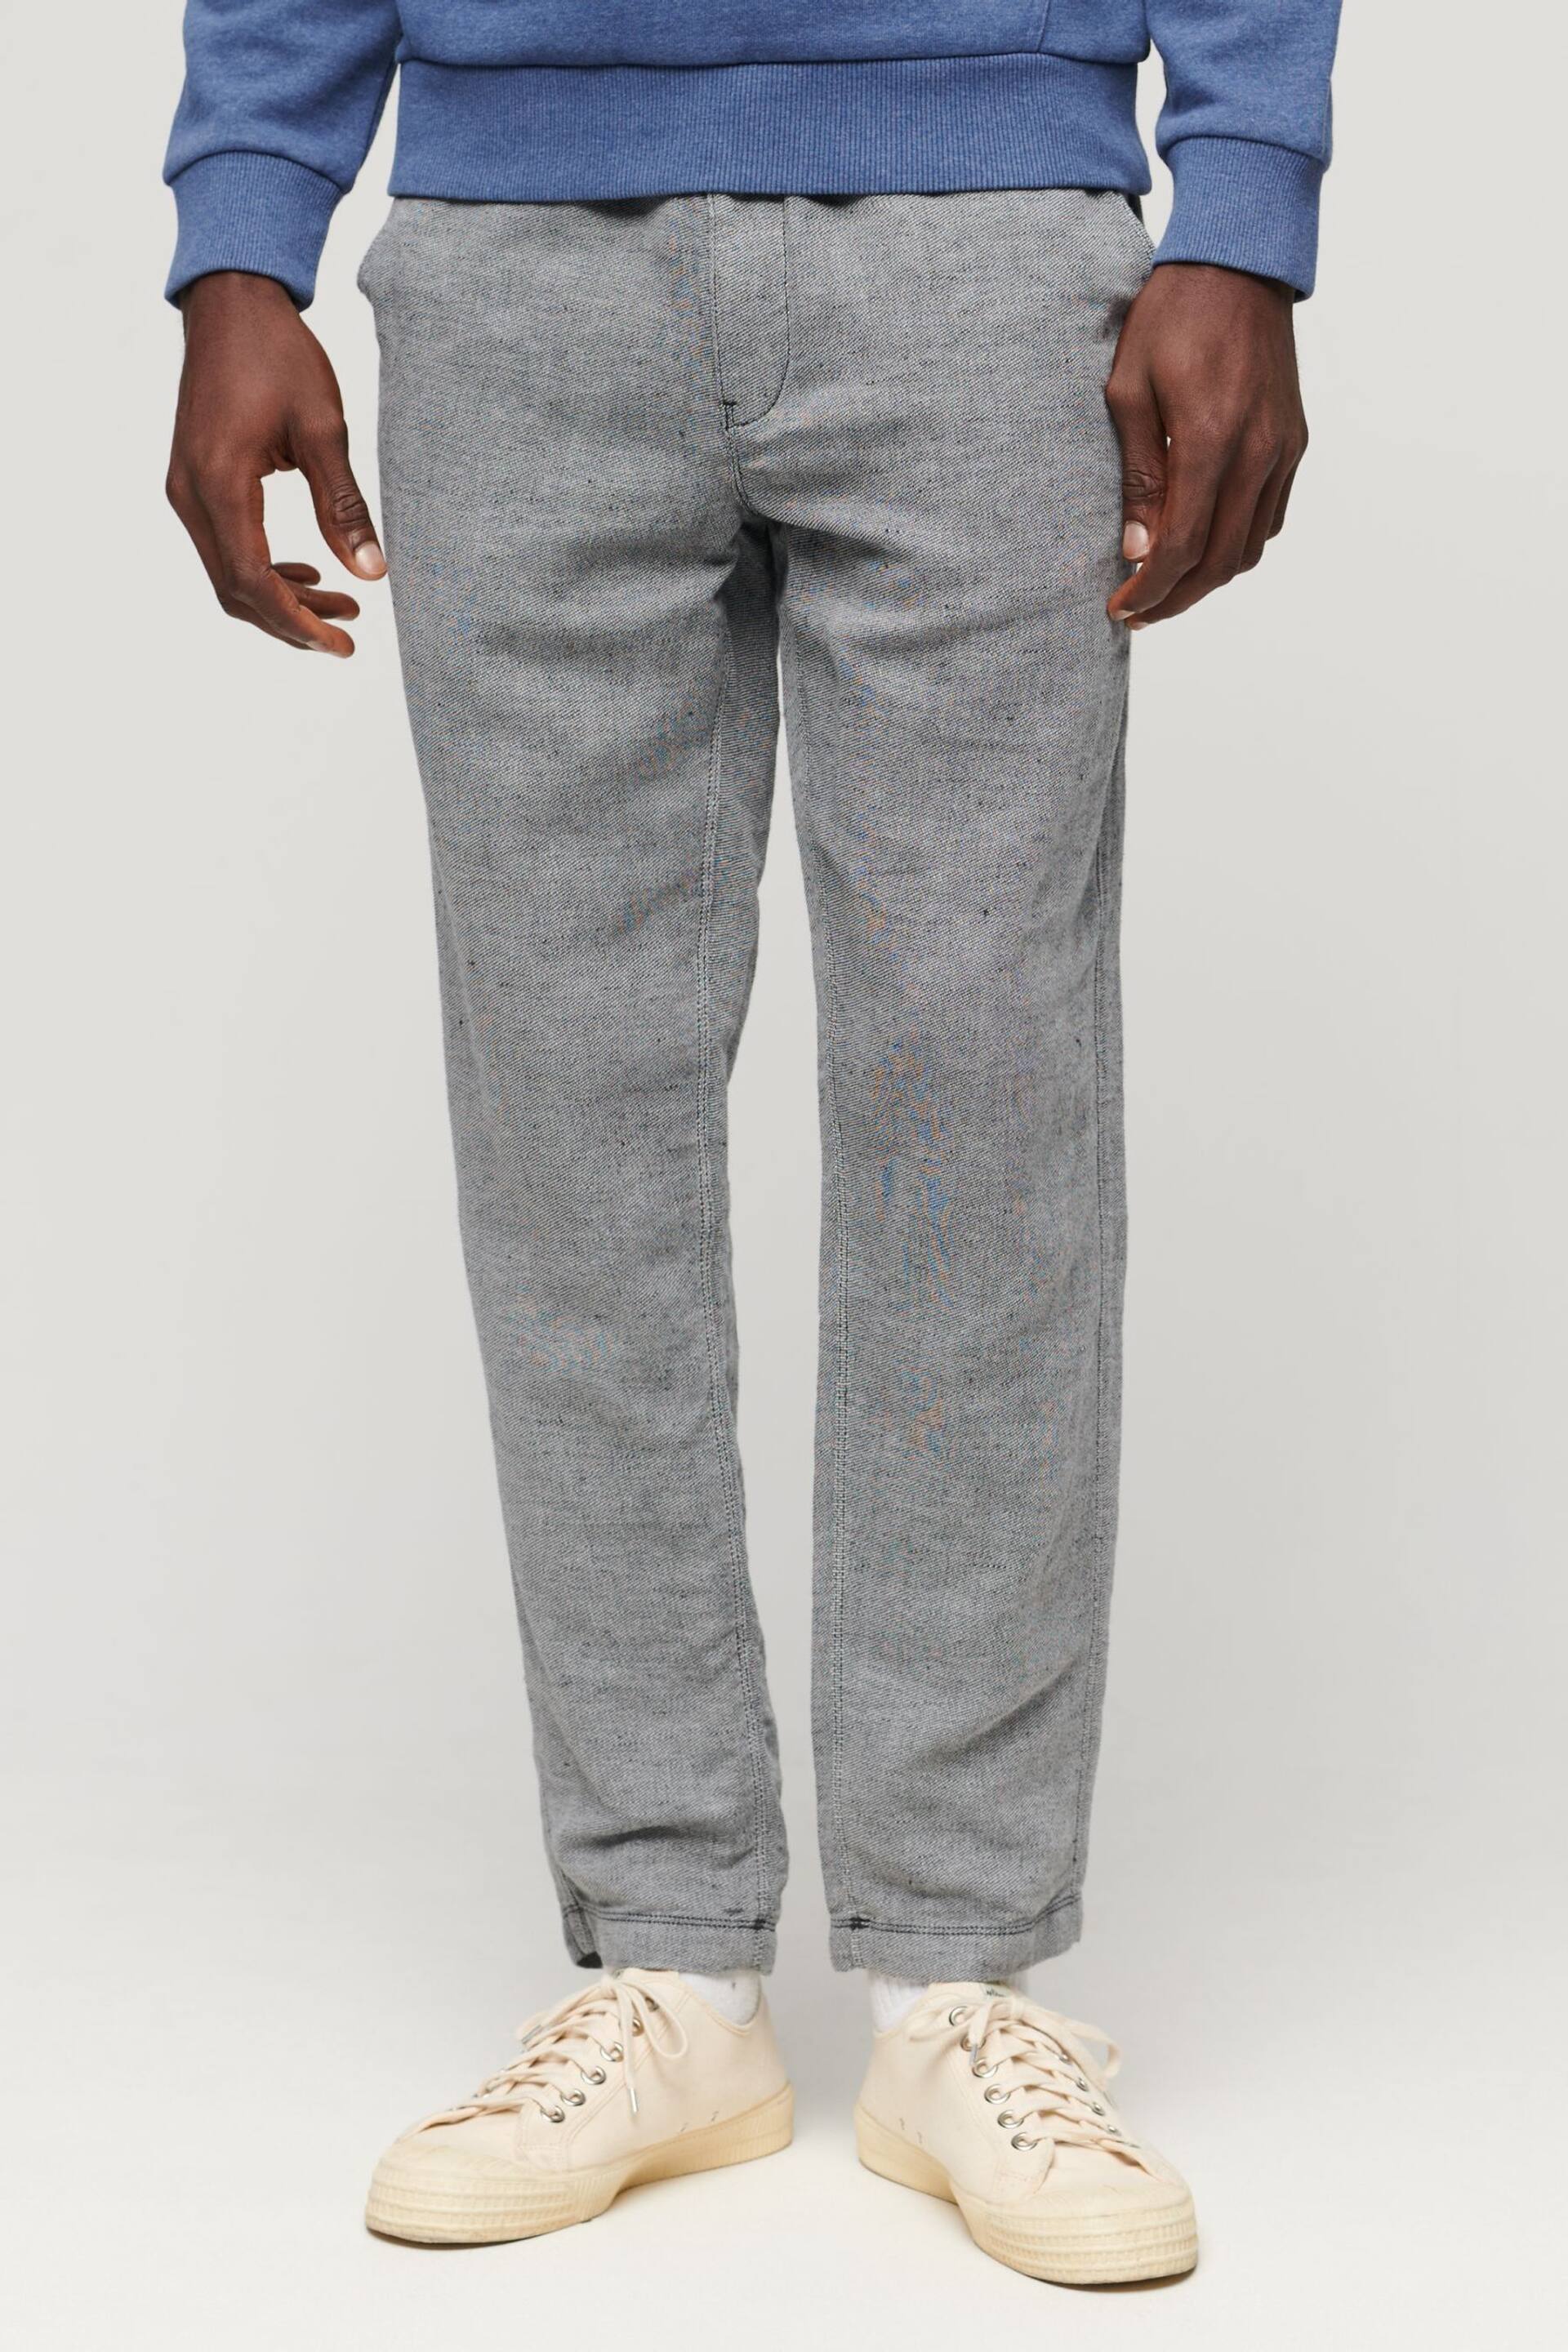 Superdry Grey Drawstring Linen Trousers - Image 1 of 5